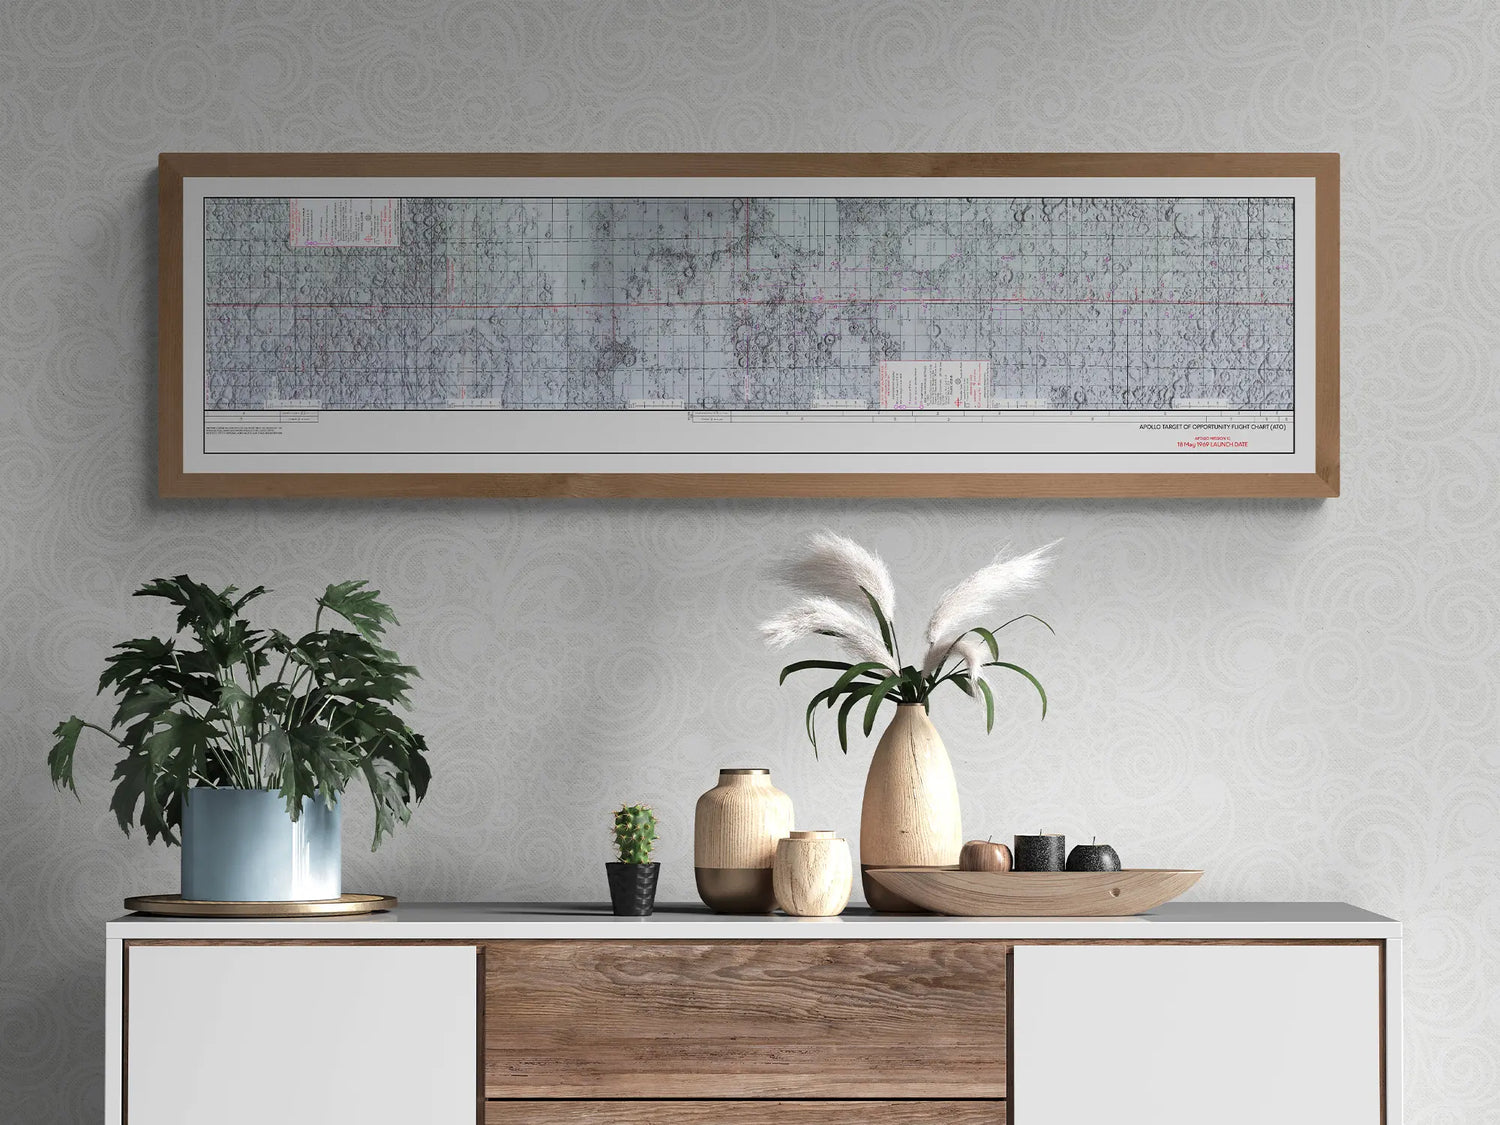 Apollo 10 Lunar Map | Apollo 10 Moon Map | Rocket Blueprint Posters | A detailed Apollo target of opportunity flight chart blueprint is framed and hung on a patterned gray wall. The modern cabinet below features potted plants, wooden vases, and other small decorative objects, creating a stylish display.